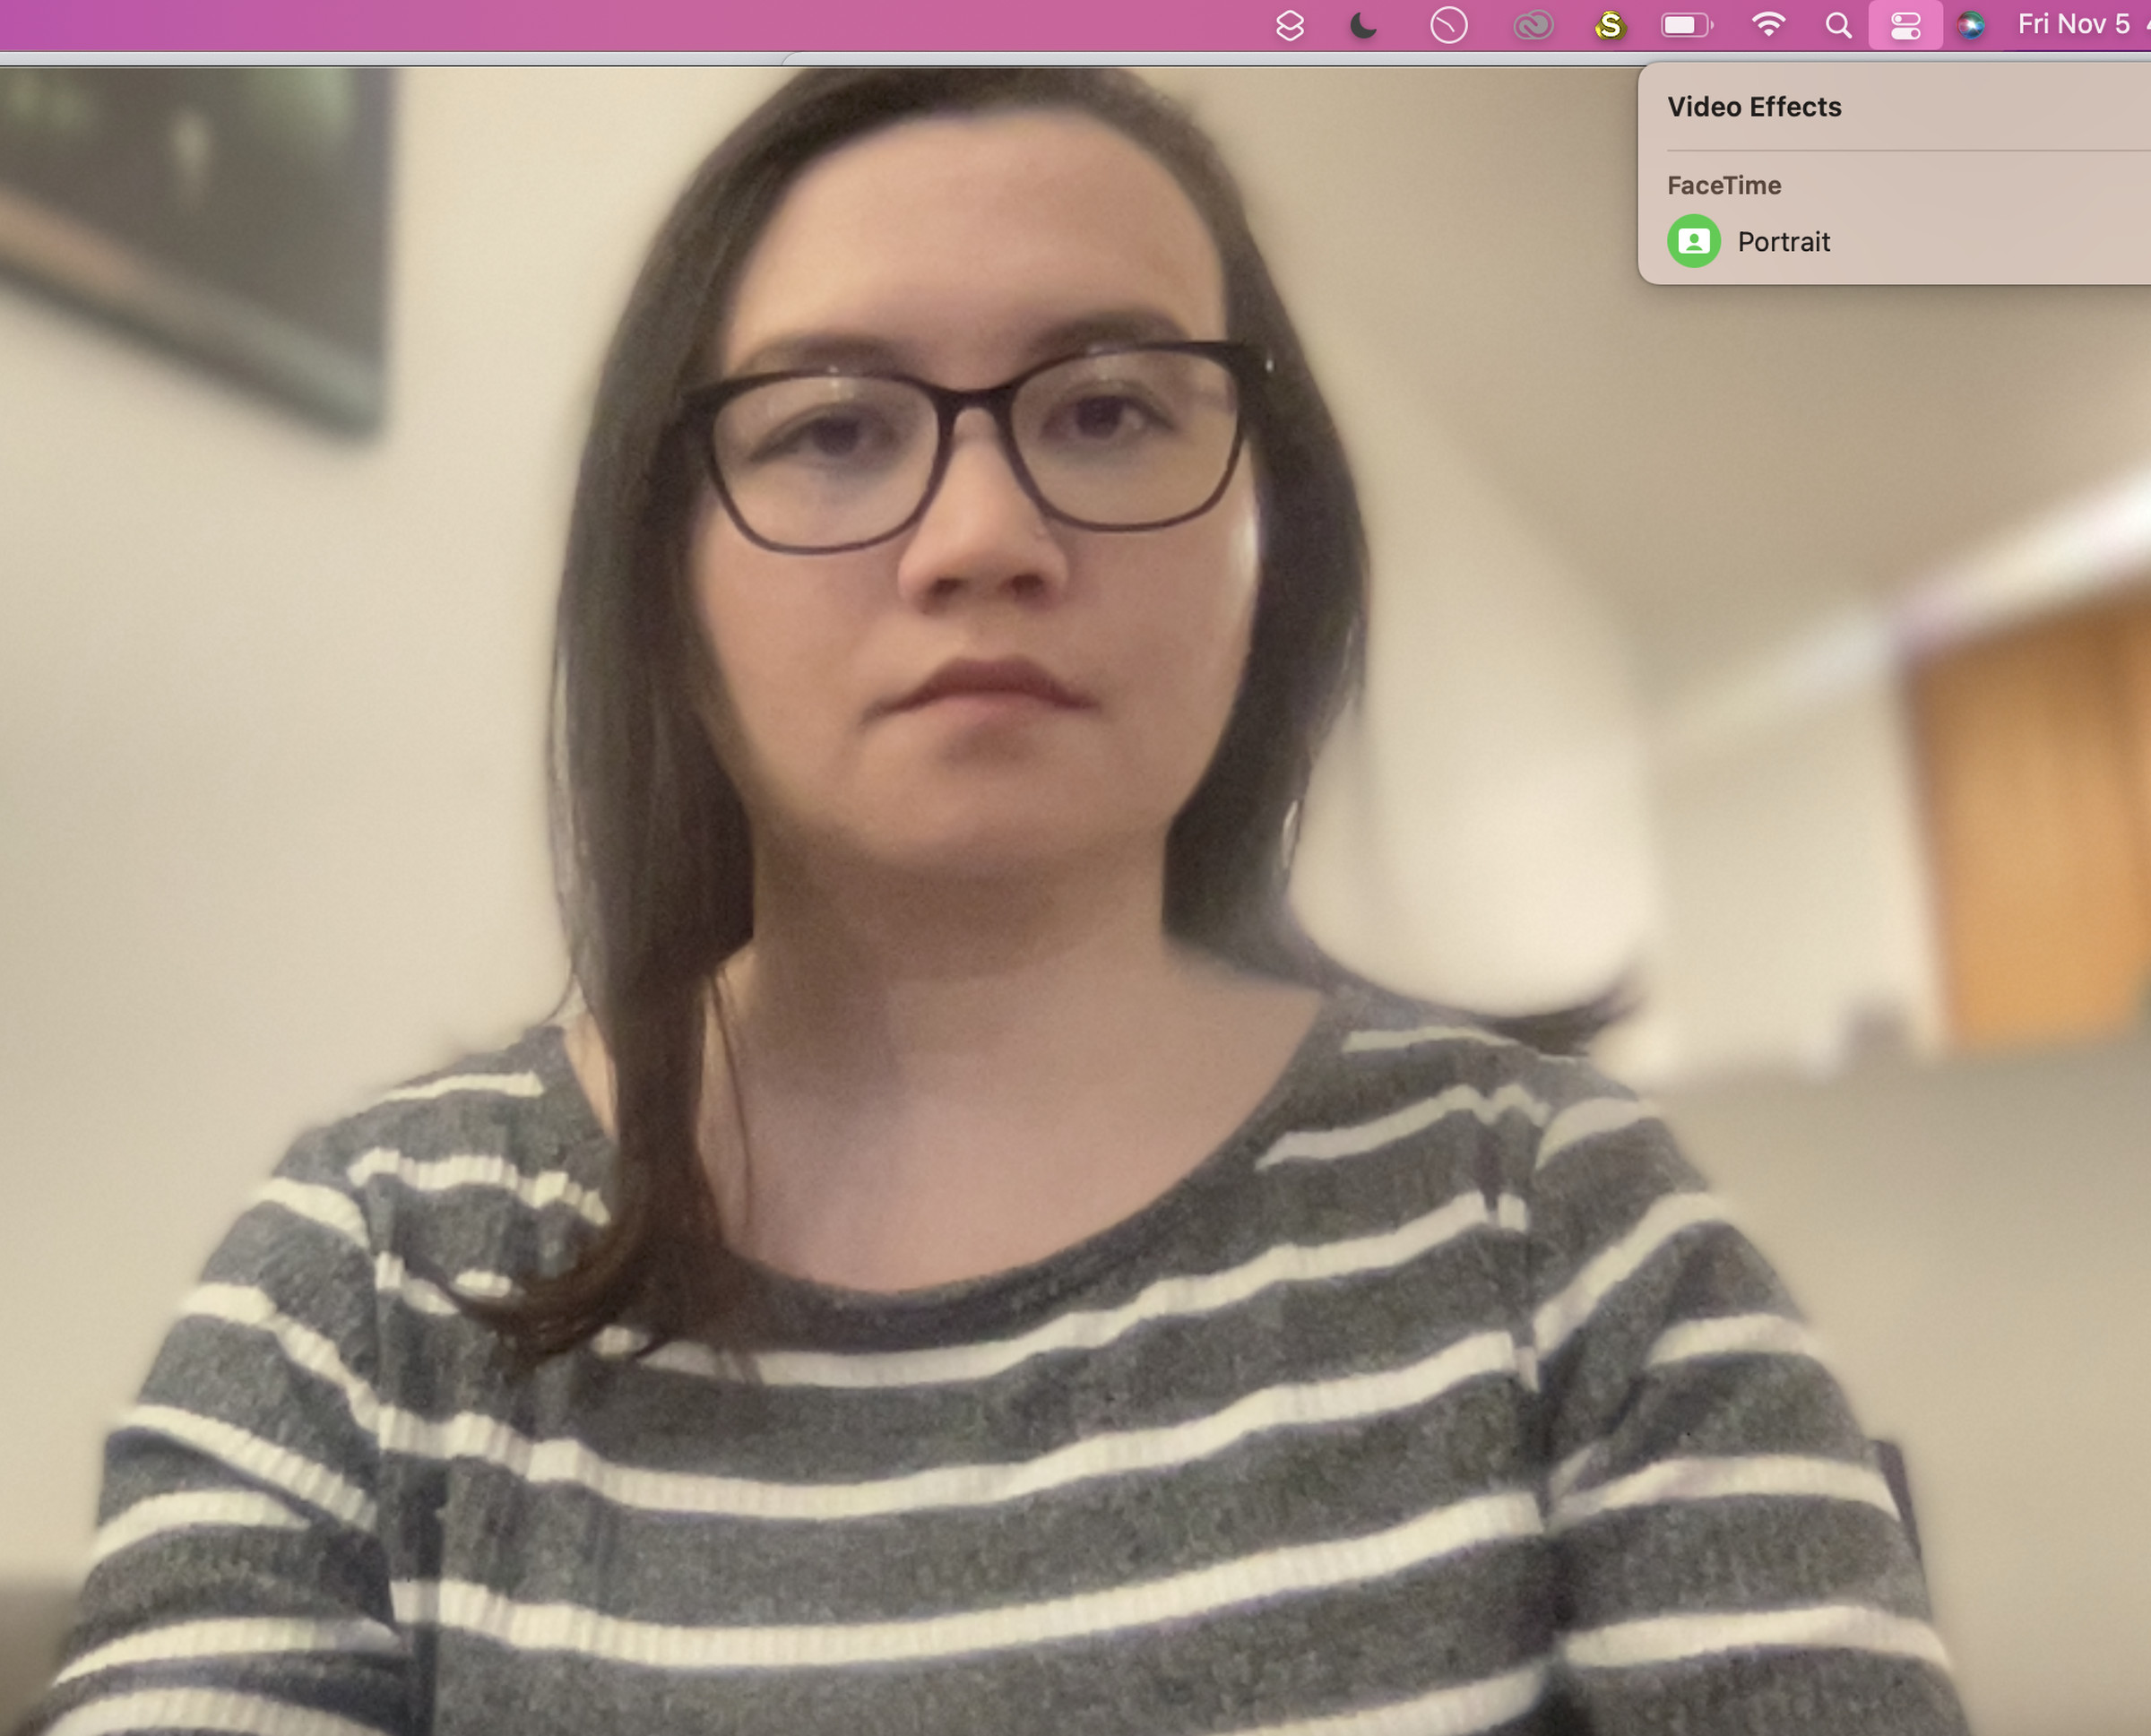 A user faces the camera on a FaceTime call with their background blurred out. A drop-down menu from the Control Center indicates that Portrait Mode is active.